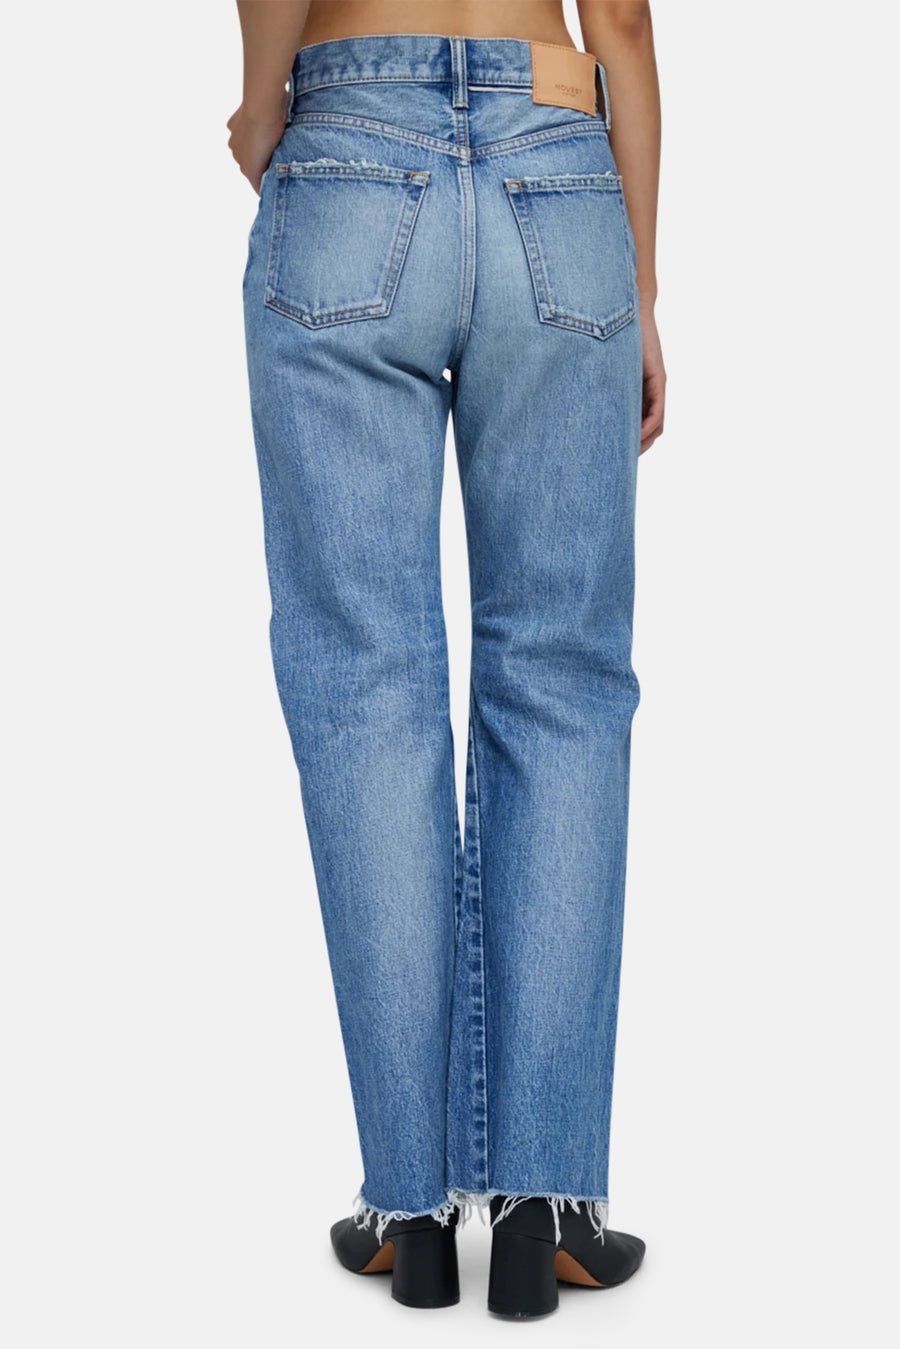 Clifton Remake Flare Jean Blue